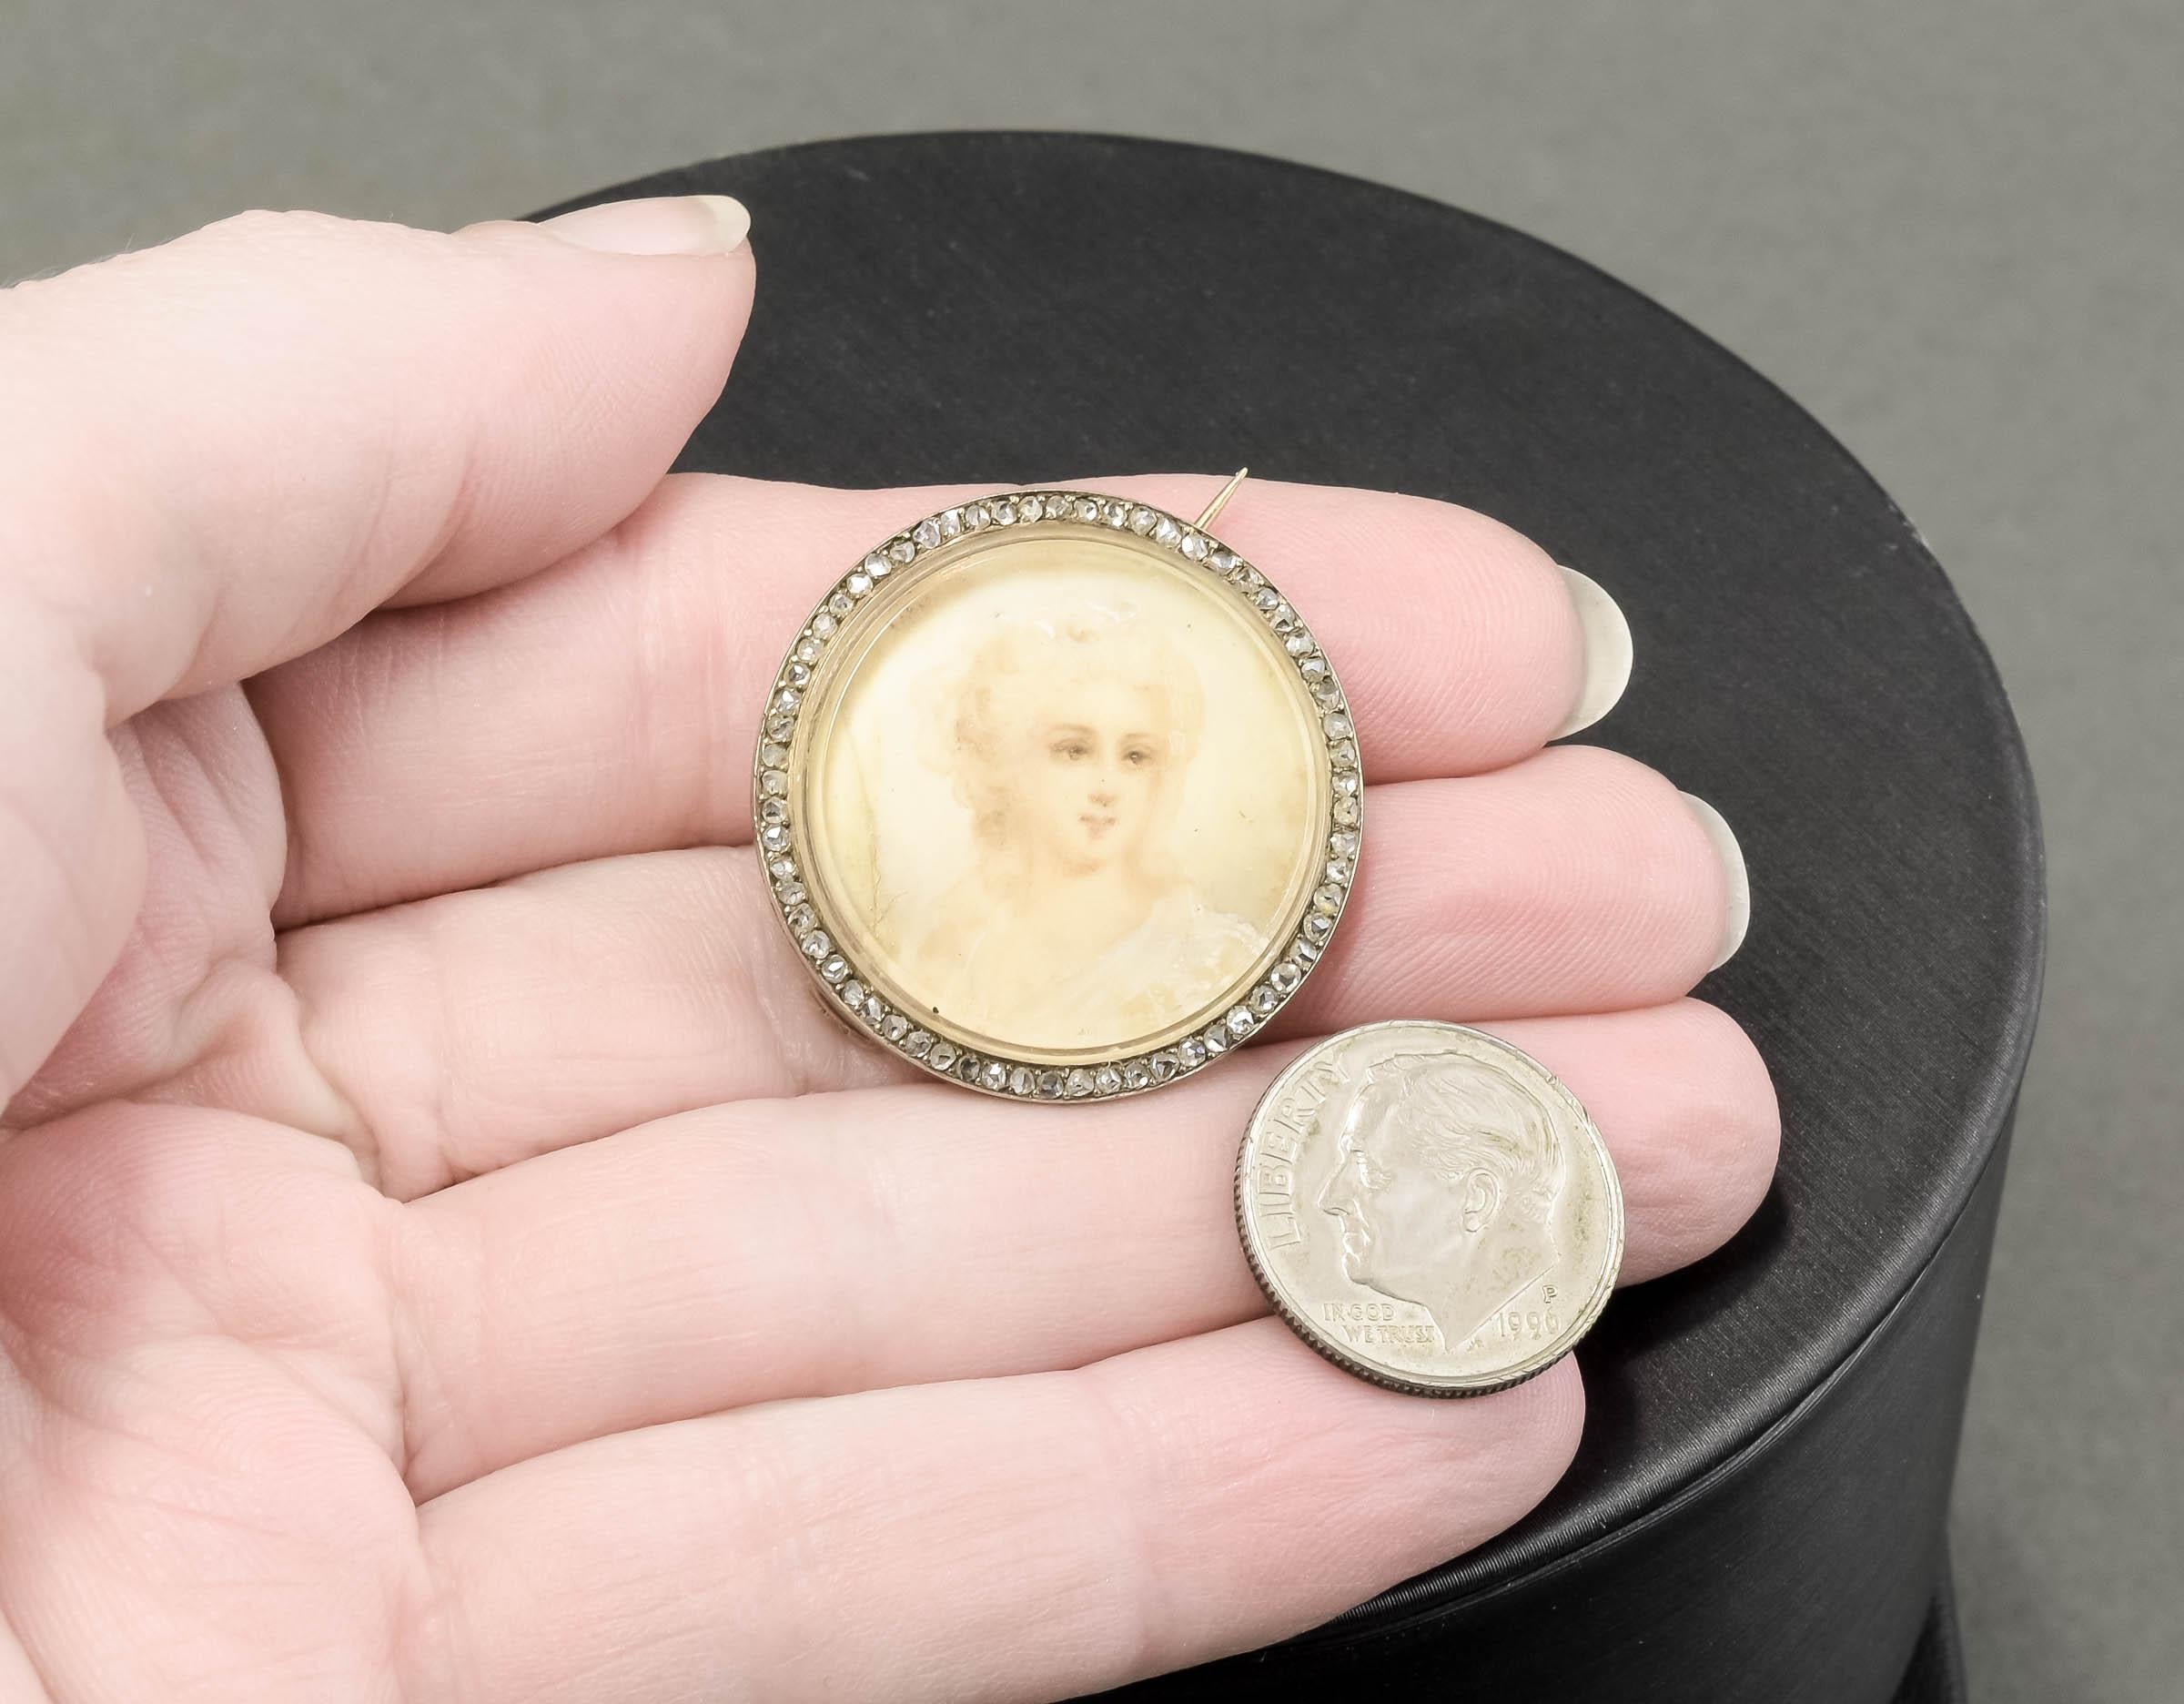 Georgian Antique Hand Painted Portrait Miniature Gold Brooch with Rose Cut Diamond Border For Sale